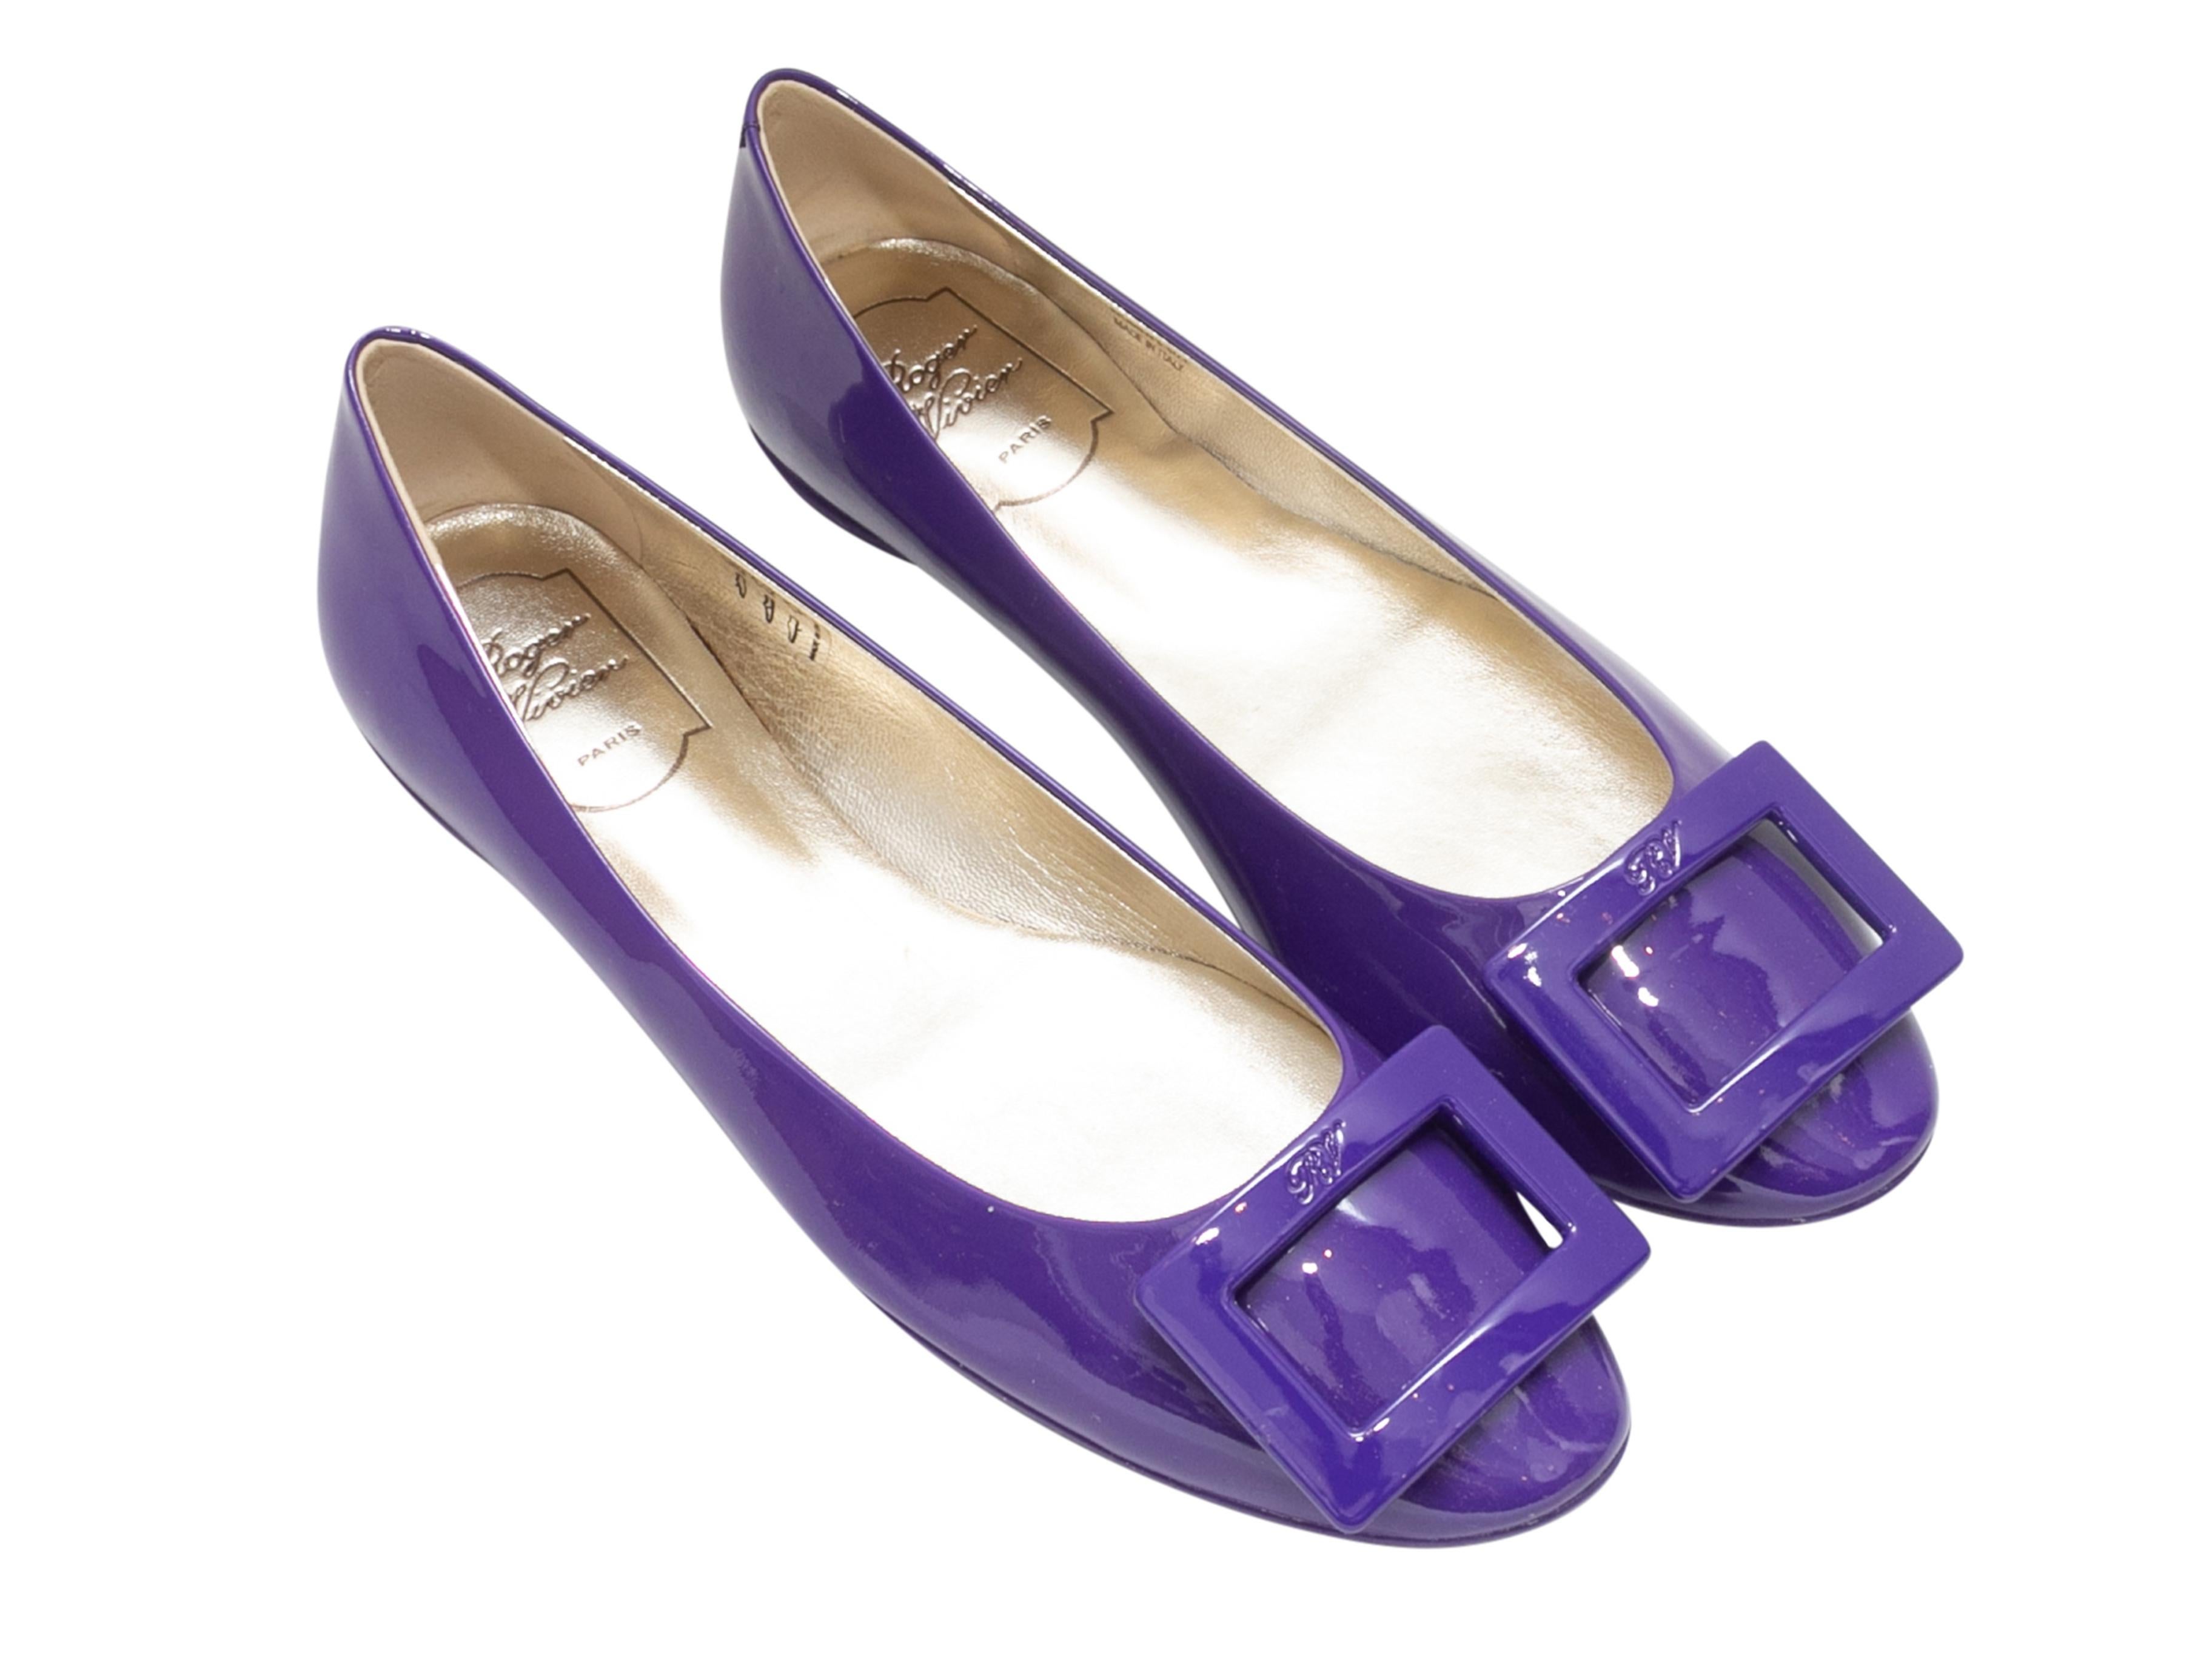 Purple patent leather Gommette ballet flats by Roger Vivier. Buckle accents at tops.